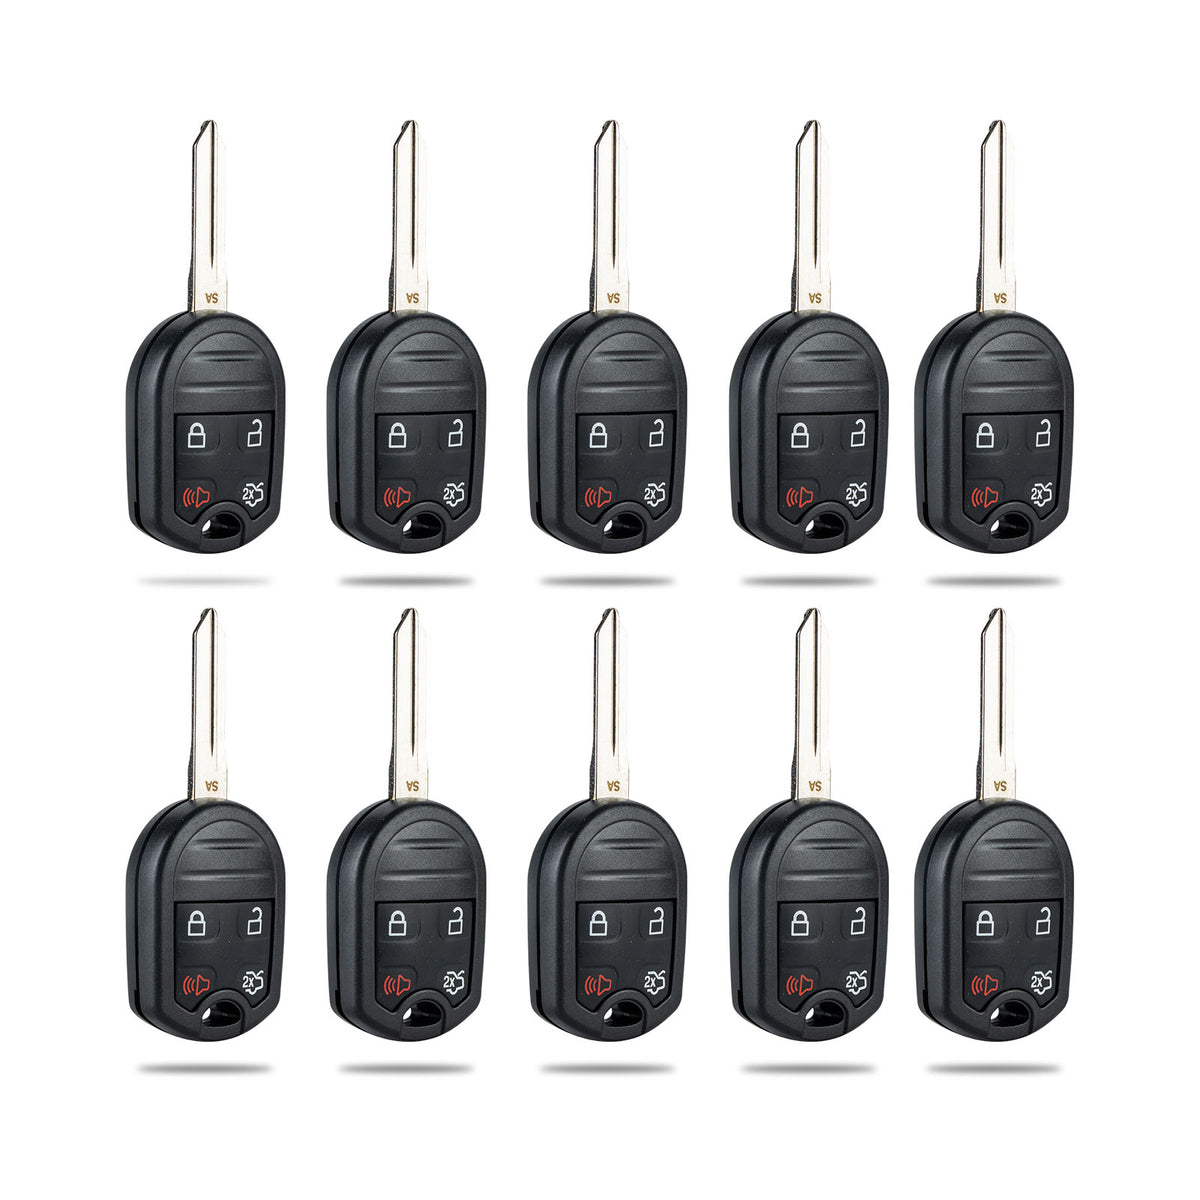 Lots of 10 Extra-Partss Remote Car Key Fob Replacement for Ford CWTWB1U793 fits Mustang Escape 2005 2006 2007 2008 2009 2010 2011 2012